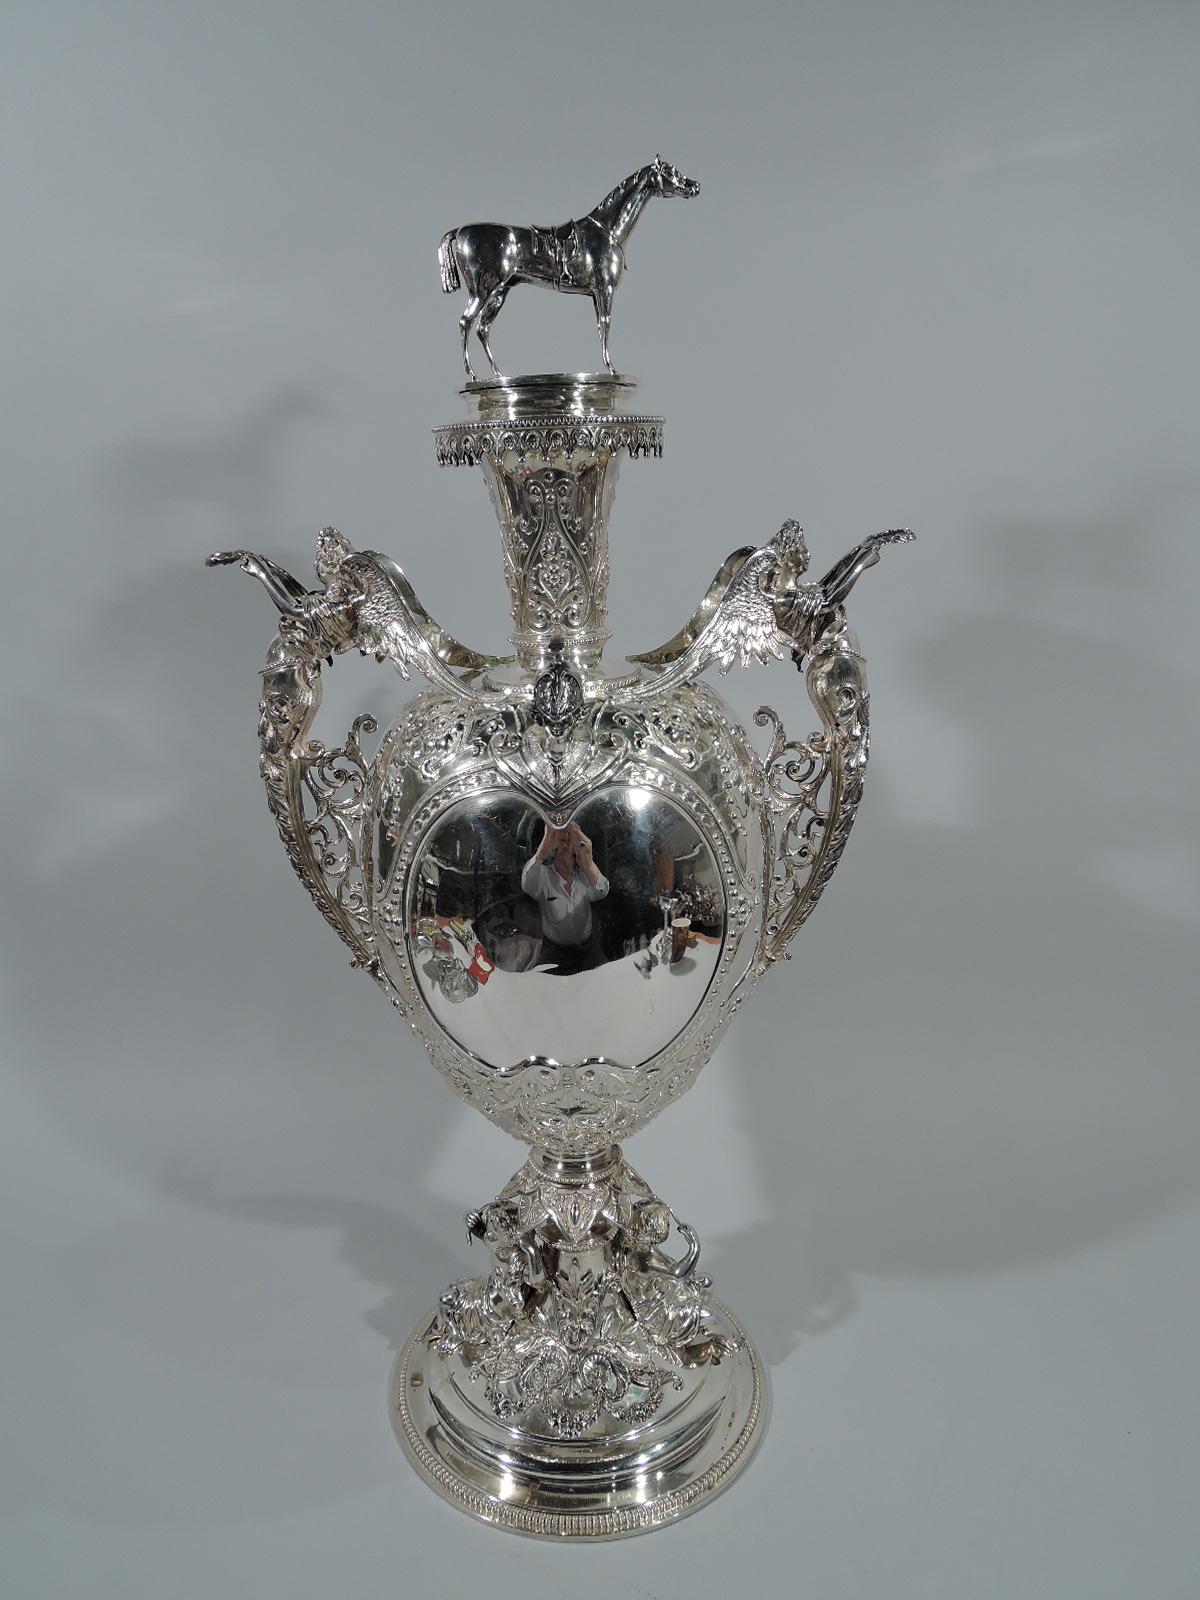 Victorian sterling silver trophy. Made by Edgar Finley and Hugh Taylor in Birmingham in 1883. Ovoid on stepped domed foot. Tapering inset neck on beaded spool base with flat cover. Cast figures, including horse finial, wing-mounted caryatid side